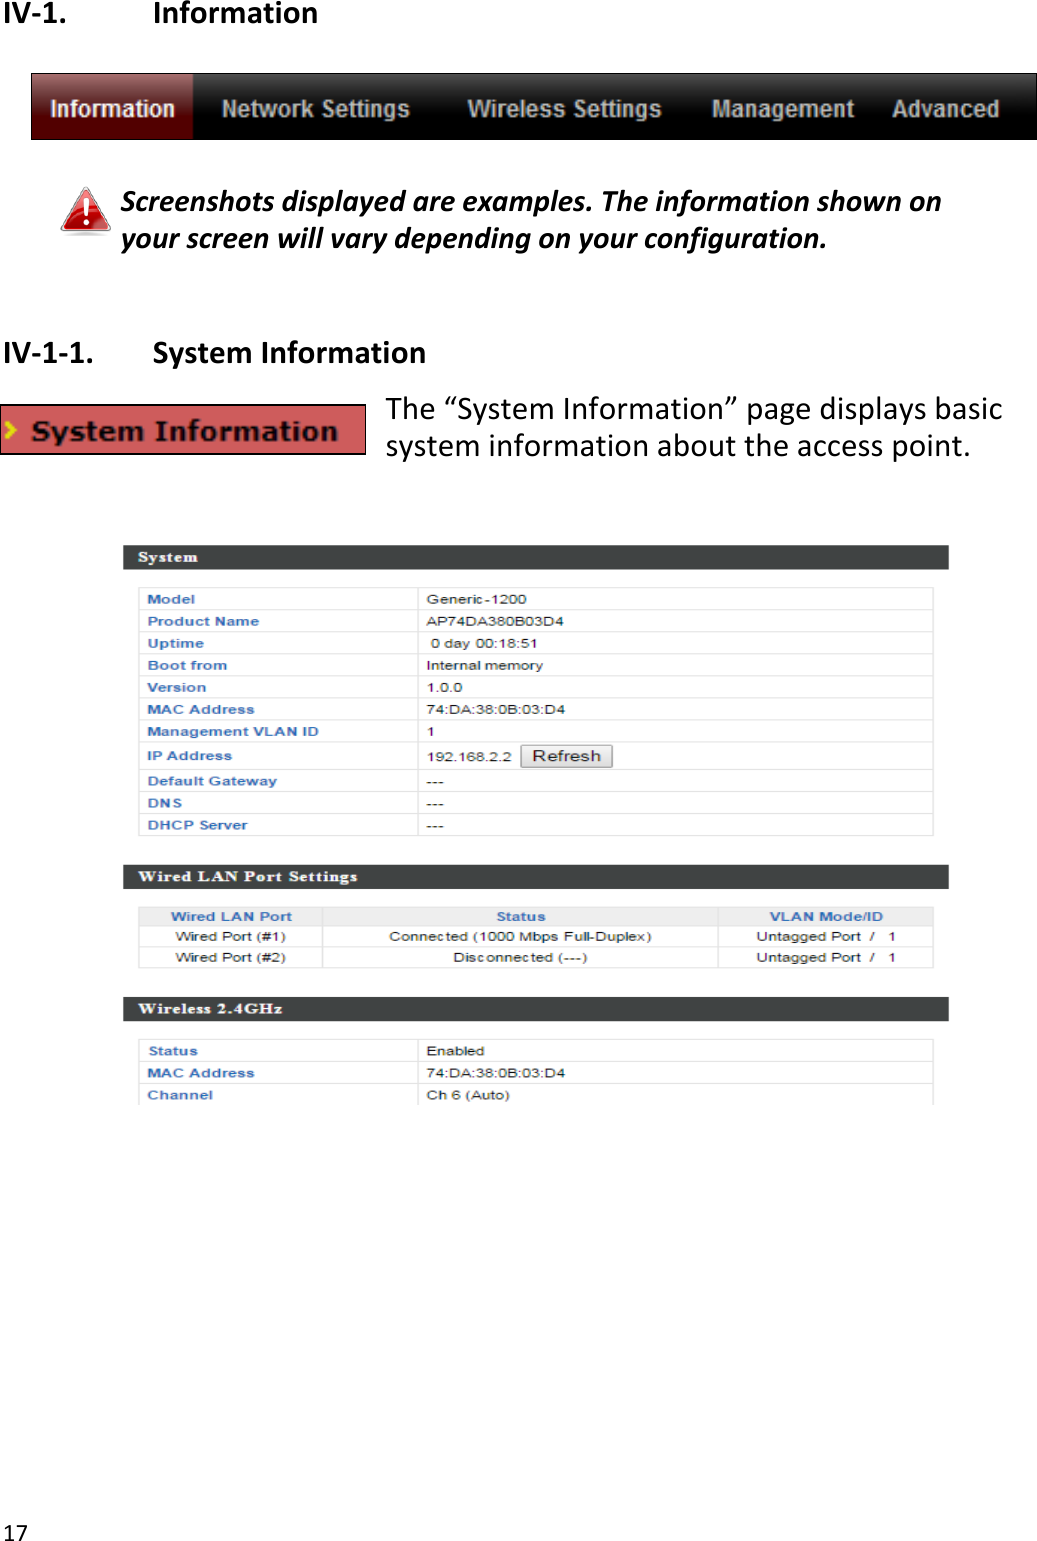 17  IV-1.    Information    Screenshots displayed are examples. The information shown on your screen will vary depending on your configuration.  IV-1-1.   System Information The “System Information” page displays basic system information about the access point.                             